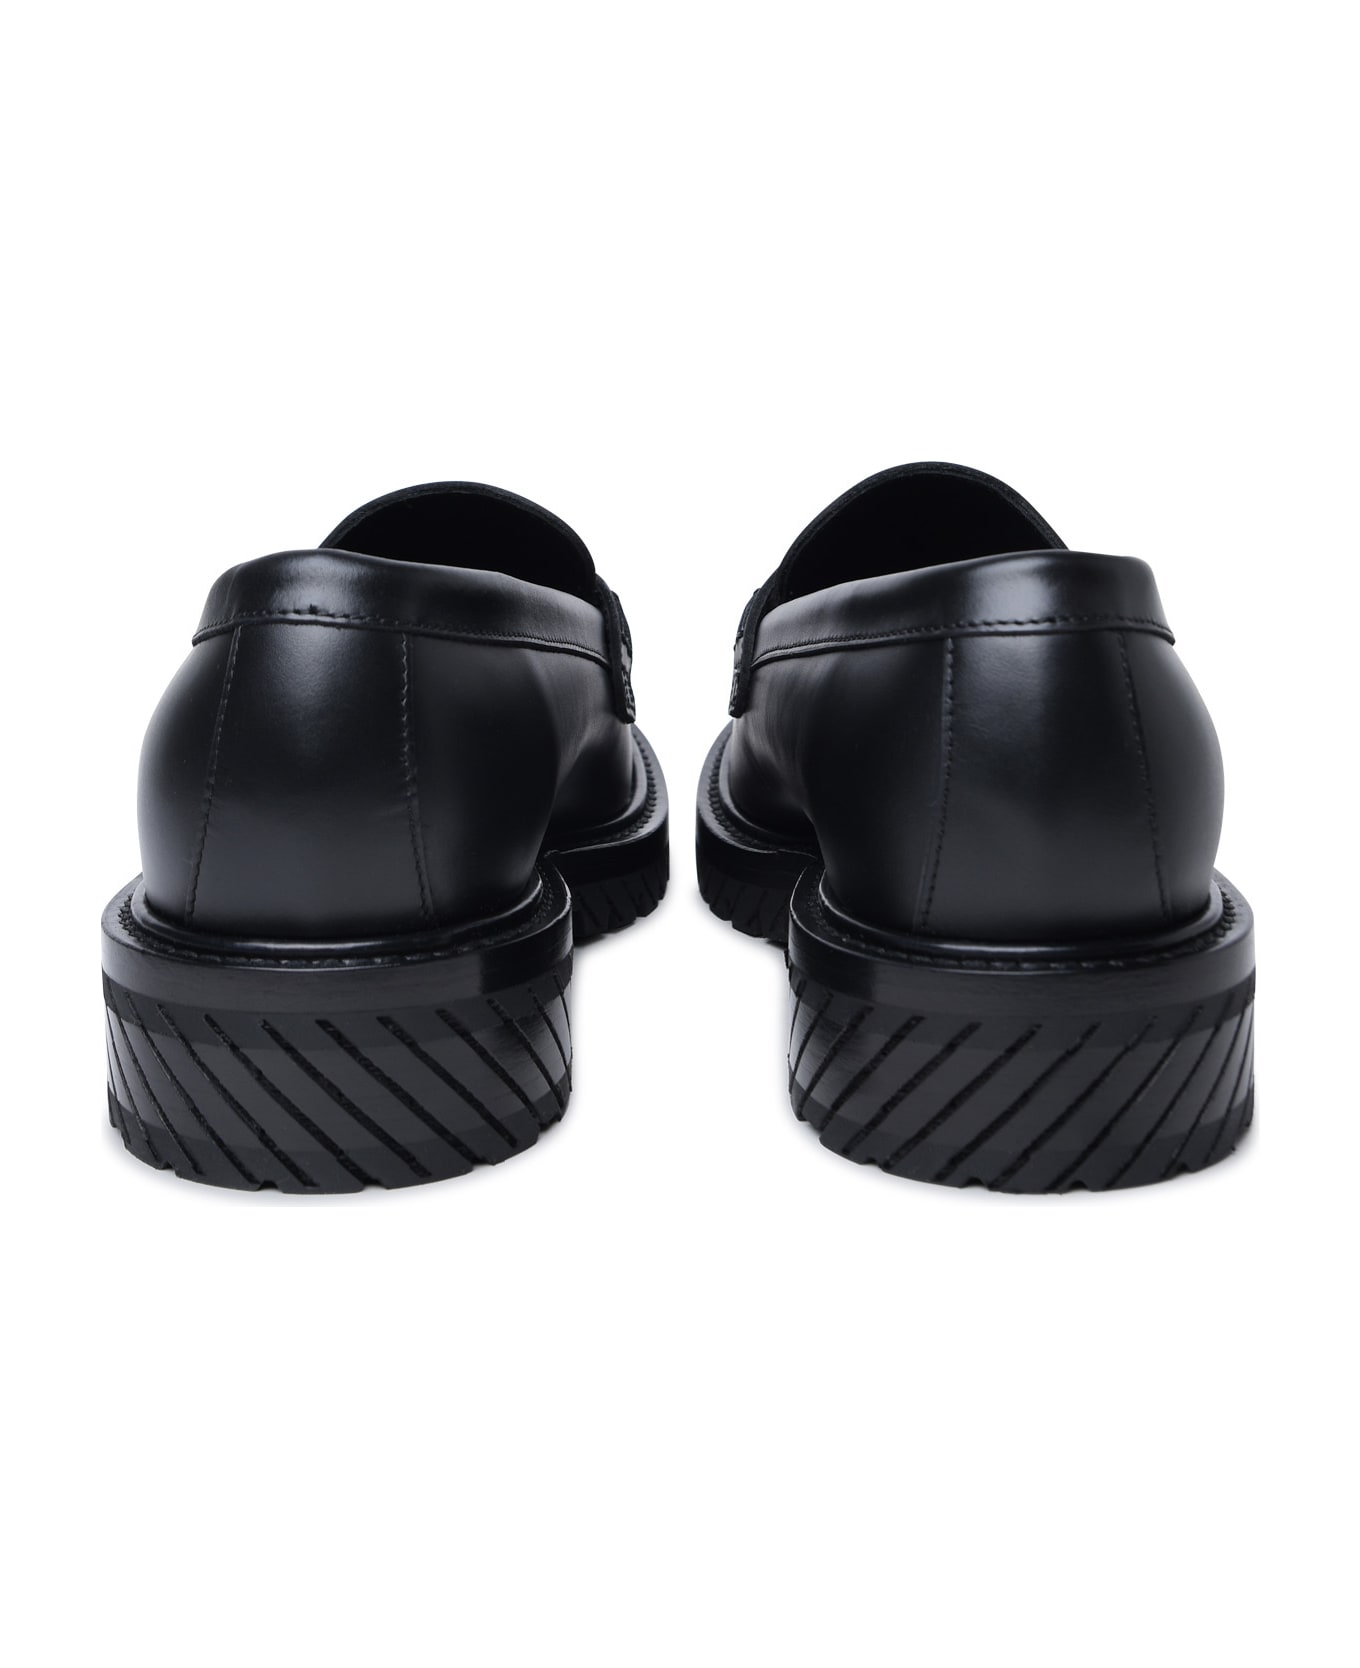 Off-White 'military' Black Leather Loafers - BLACK BLACK (Black) ローファー＆デッキシューズ